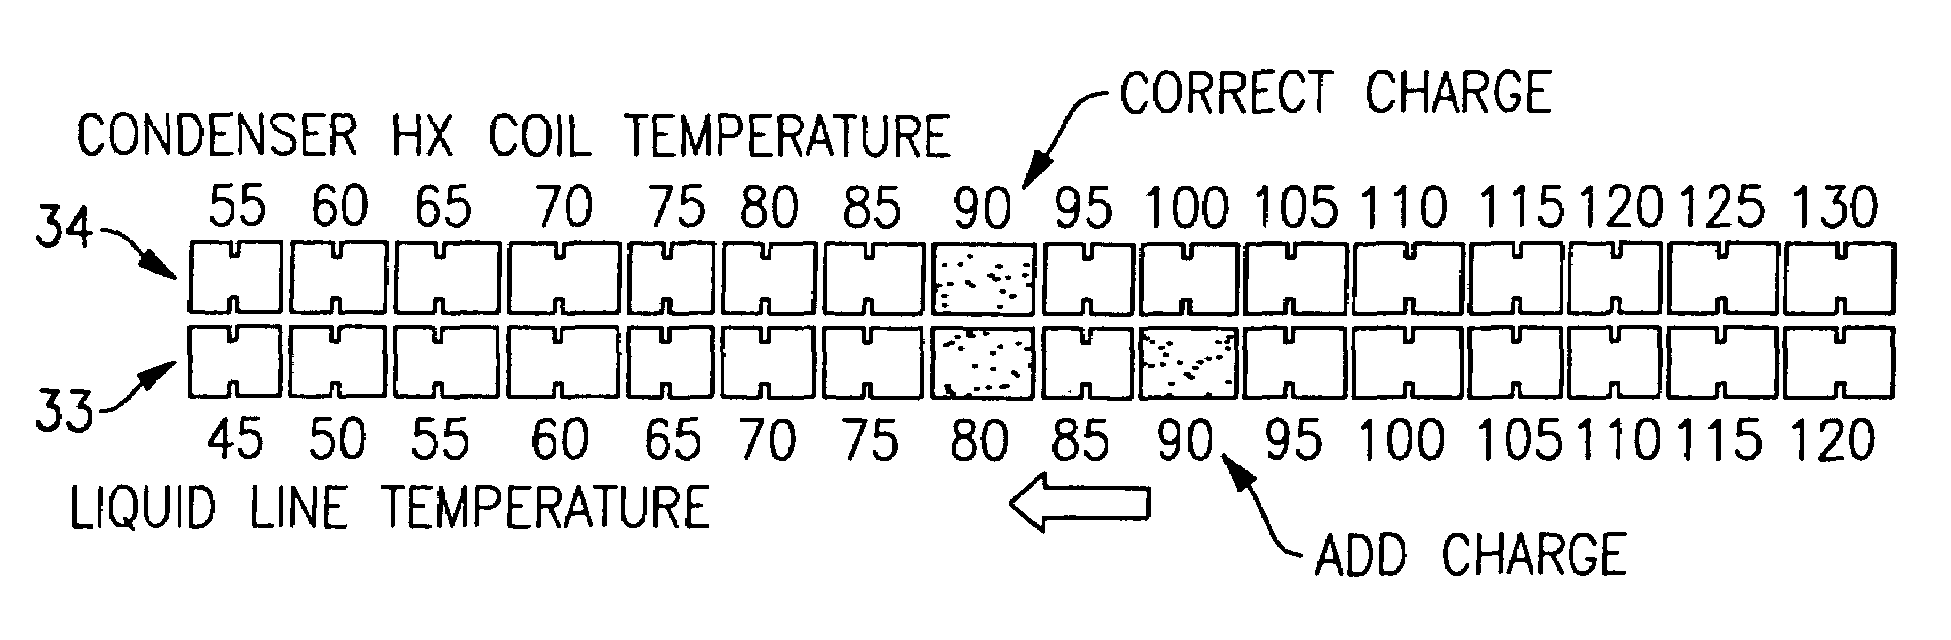 Dual thermochromic liquid crystal temperature sensing for refrigerant charge indication